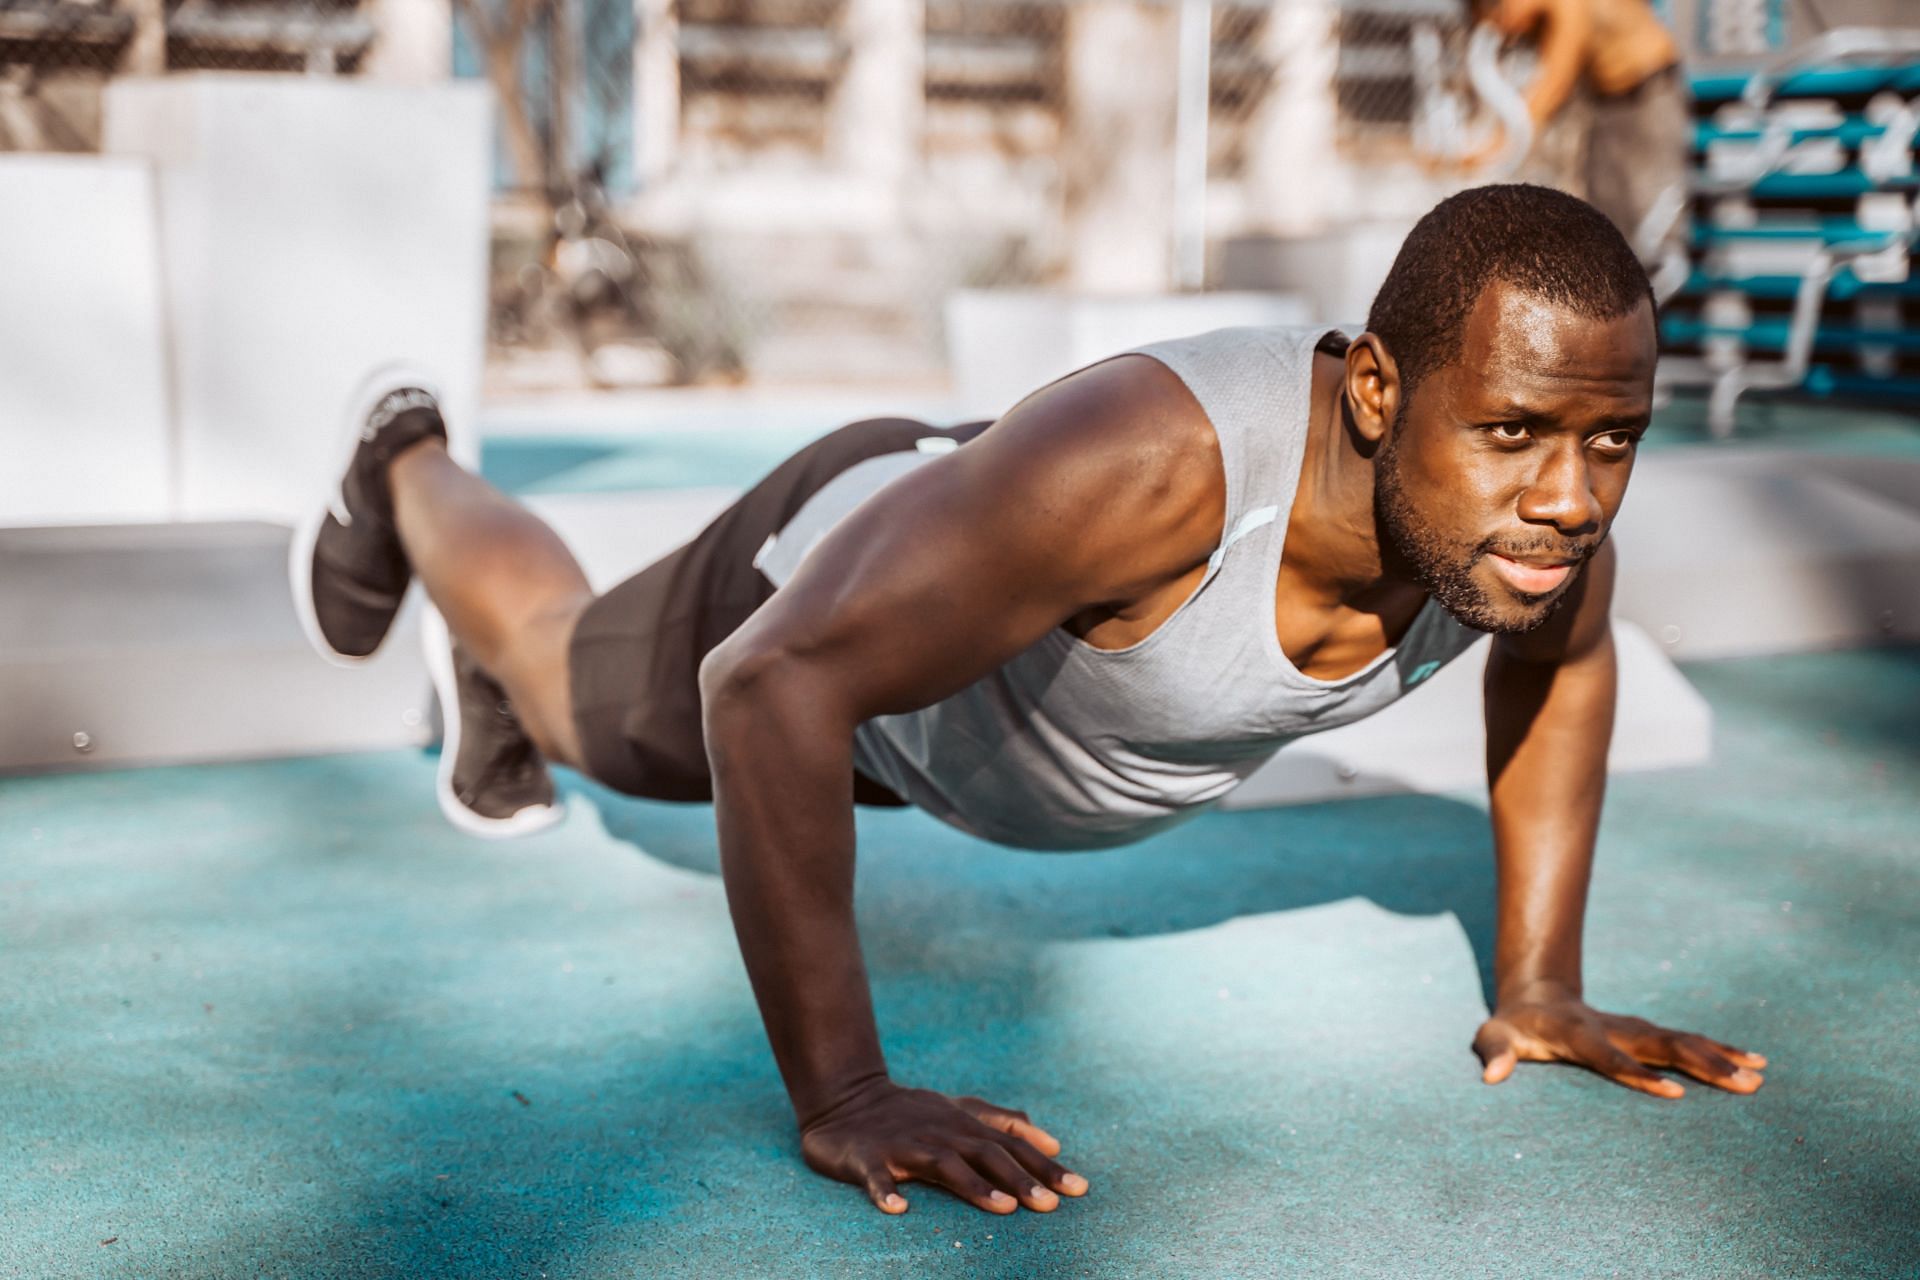 Bodyweight exercises also let you mix both cardio and strength training, allowing you to complete the workout as quickly and effectively as possible. (Image via Unsplash/ Fortune Vieyra)